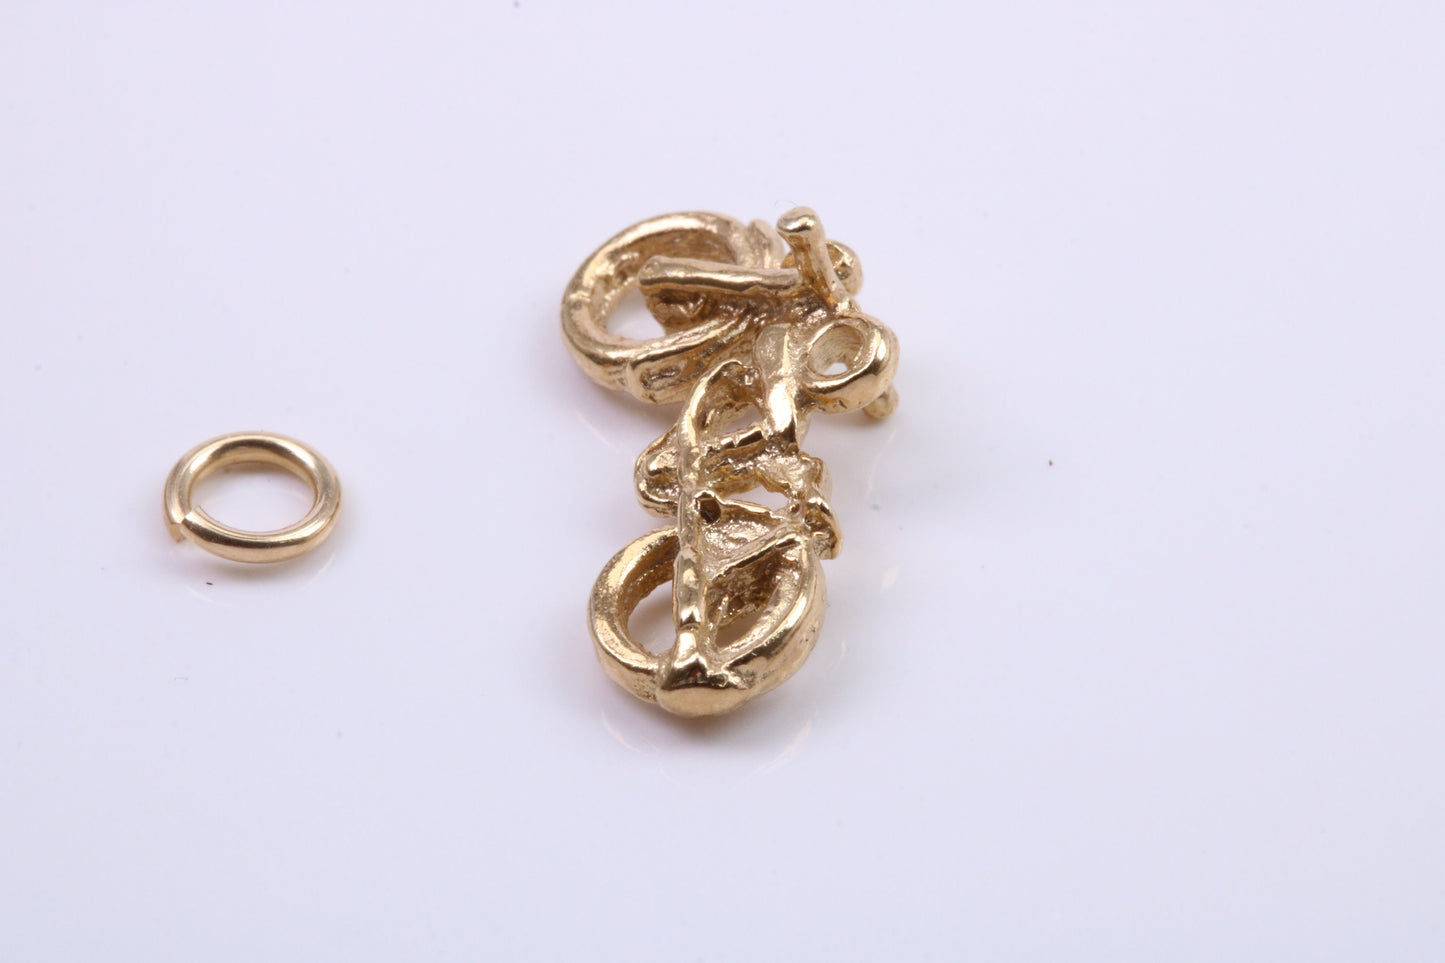 Motorbike Charm, Traditional Charm, Made from Solid 9ct Yellow Gold, British Hallmarked, Complete with Attachment Link